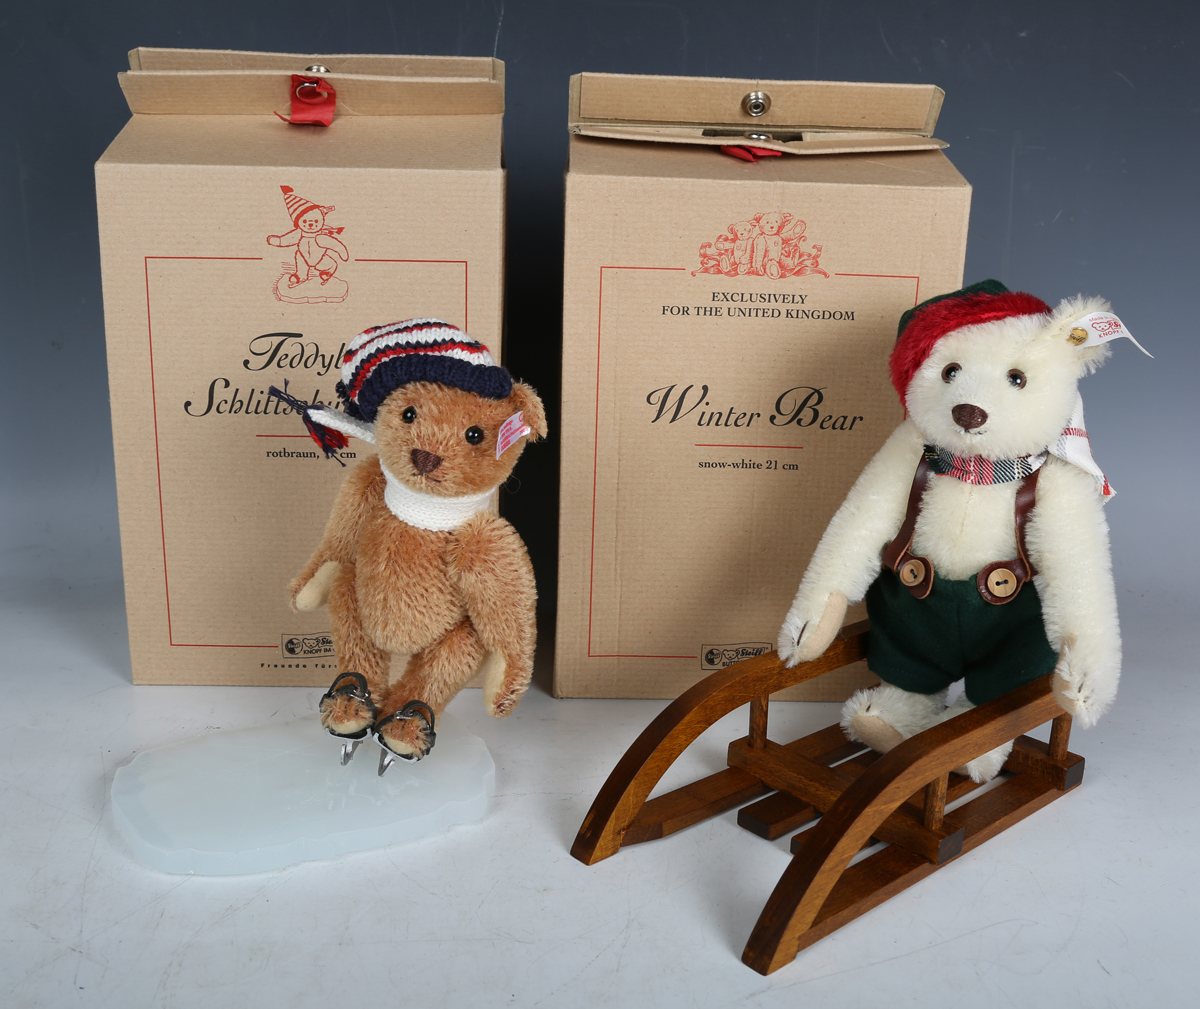 Two Steiff limited edition teddy bears, comprising No. 654817 Winter Bear and No. 037825 Teddy